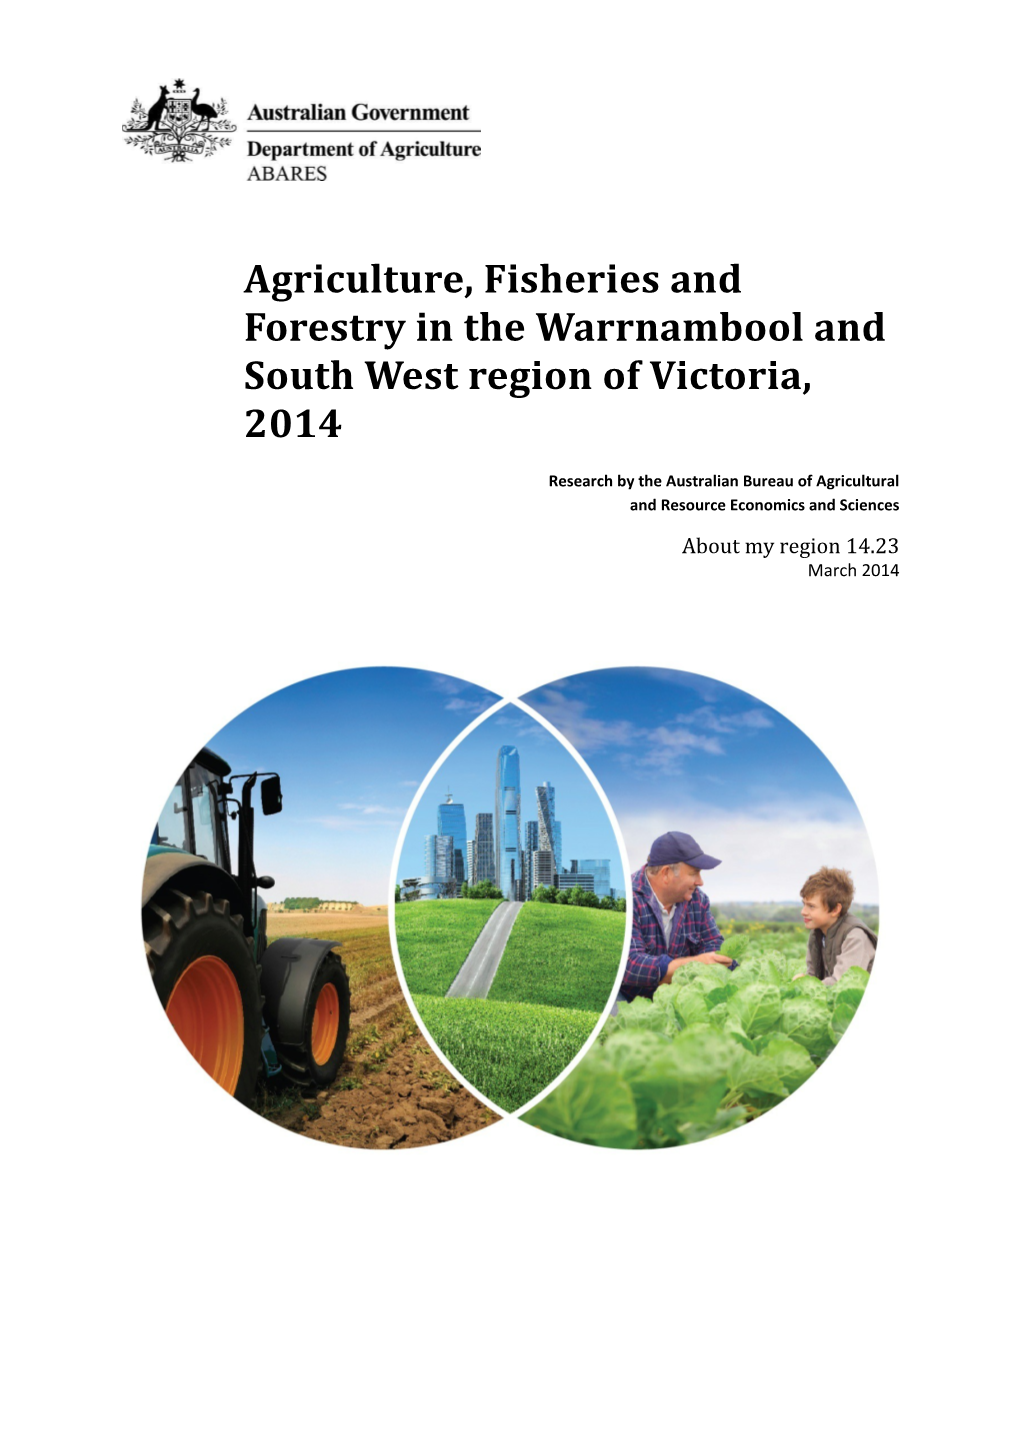 Agriculture, Fisheries and Forestry in the Warrnambool and South West Region of Victoria, 2014